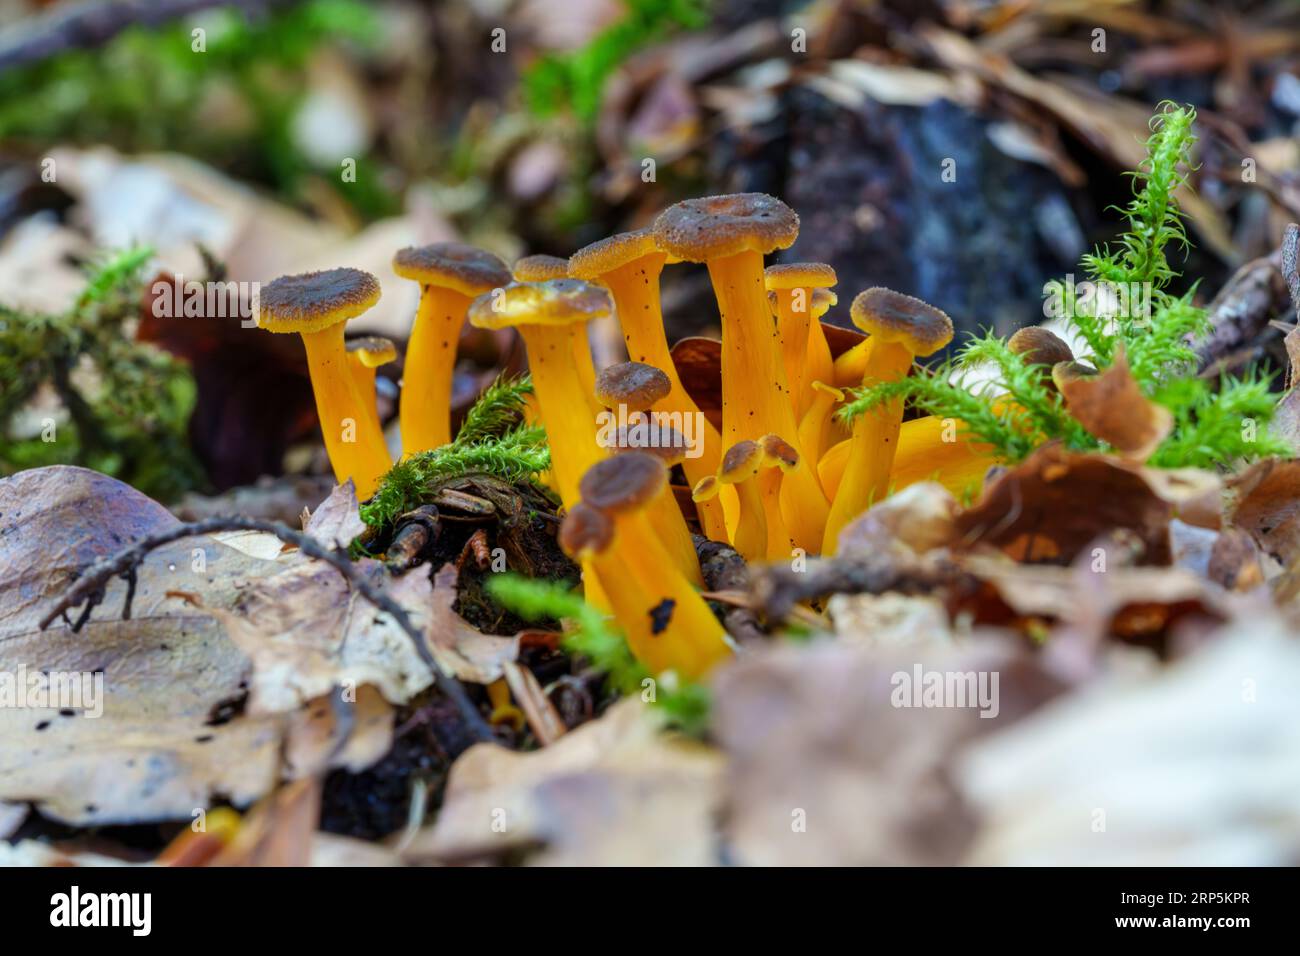 A group of edible Yellow Foot, Craterellus lutescens mushrooms growing on a mossy forest floor in a beautiful autumn light. Stock Photo